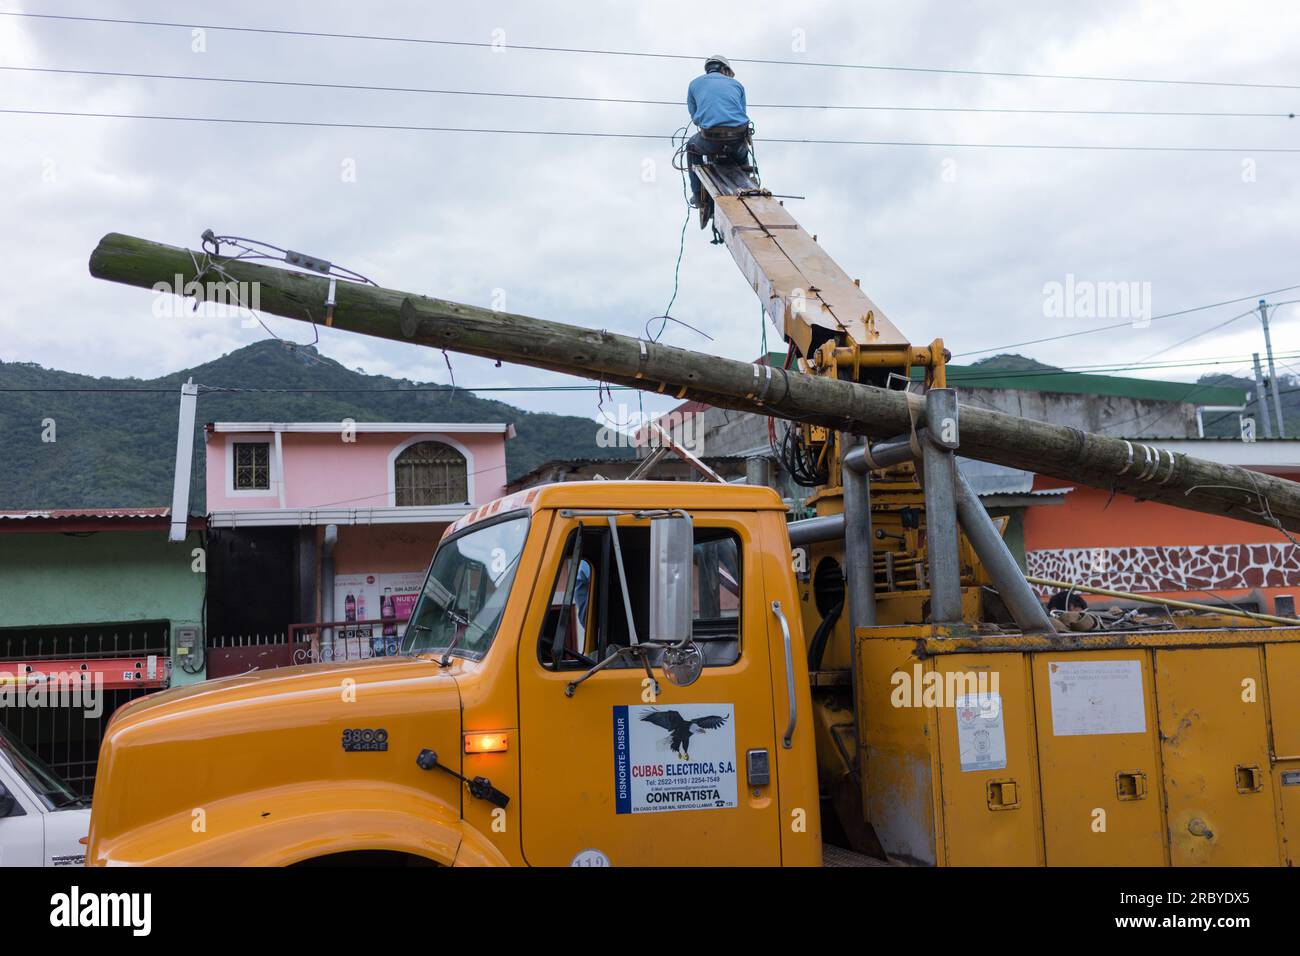 A Nicaraguan work sit on the top of a extensible support to reach wires while working on replacing a telephone pole. Stock Photo